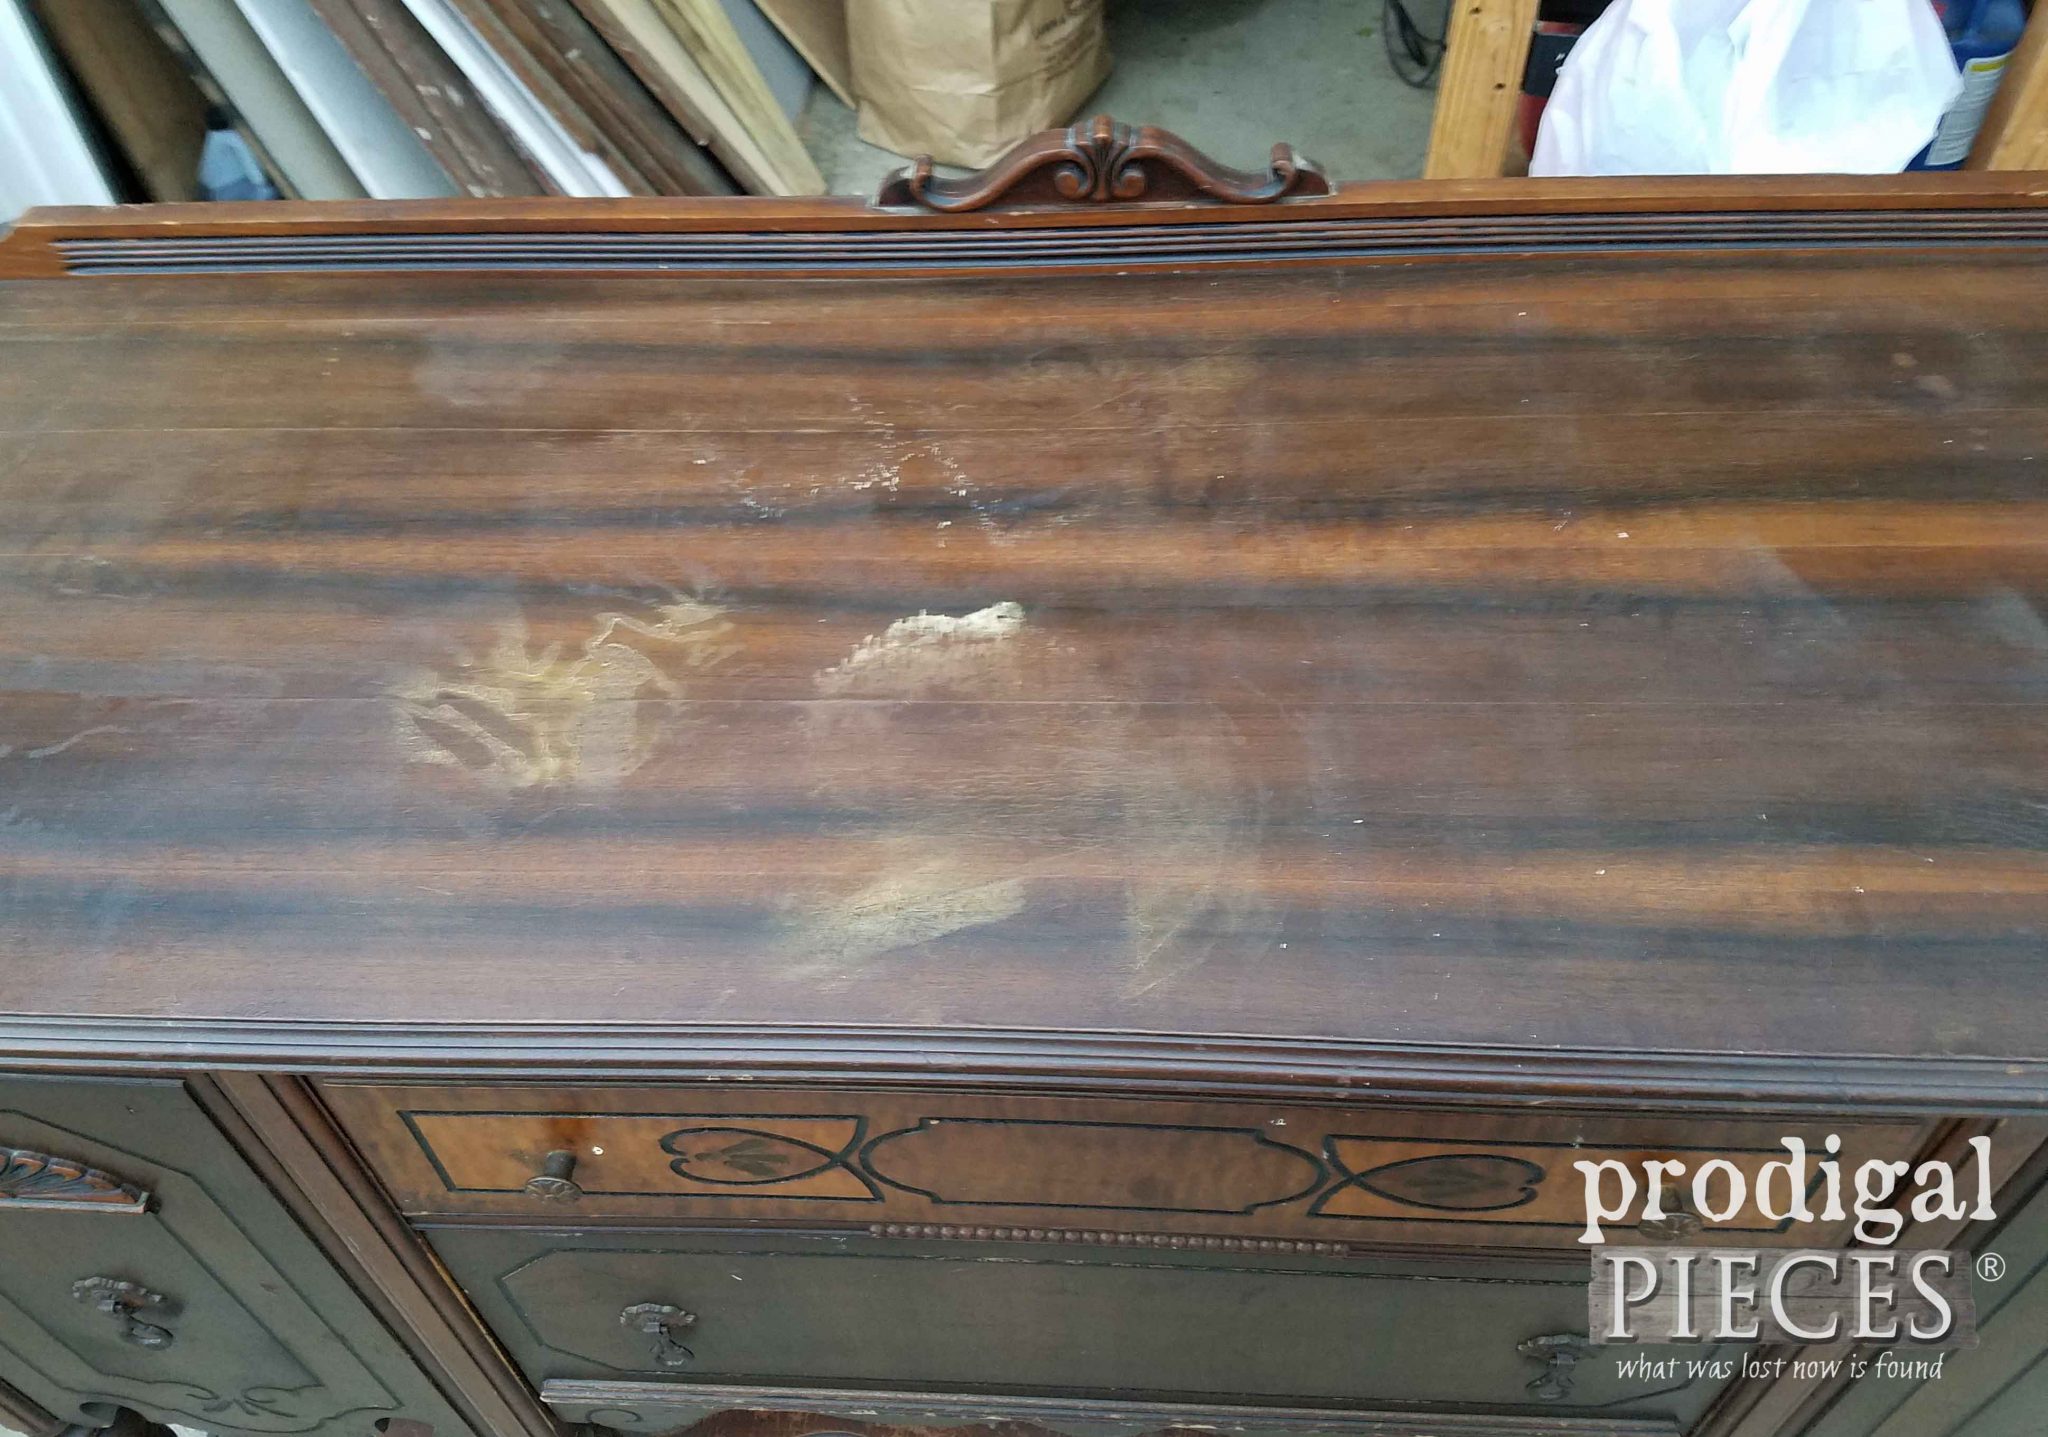 Chemical Stains on Buffet | prodigalpieces.com